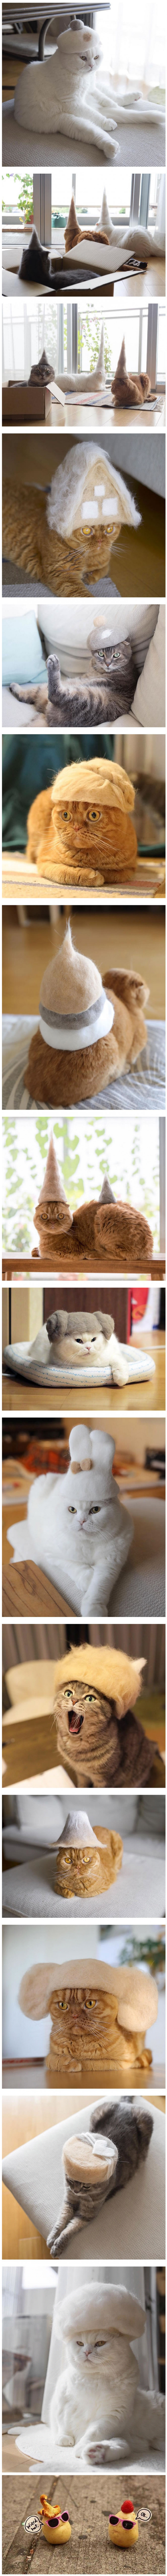 Photographer Makes Hats For His Cats Using Their Own Fluff